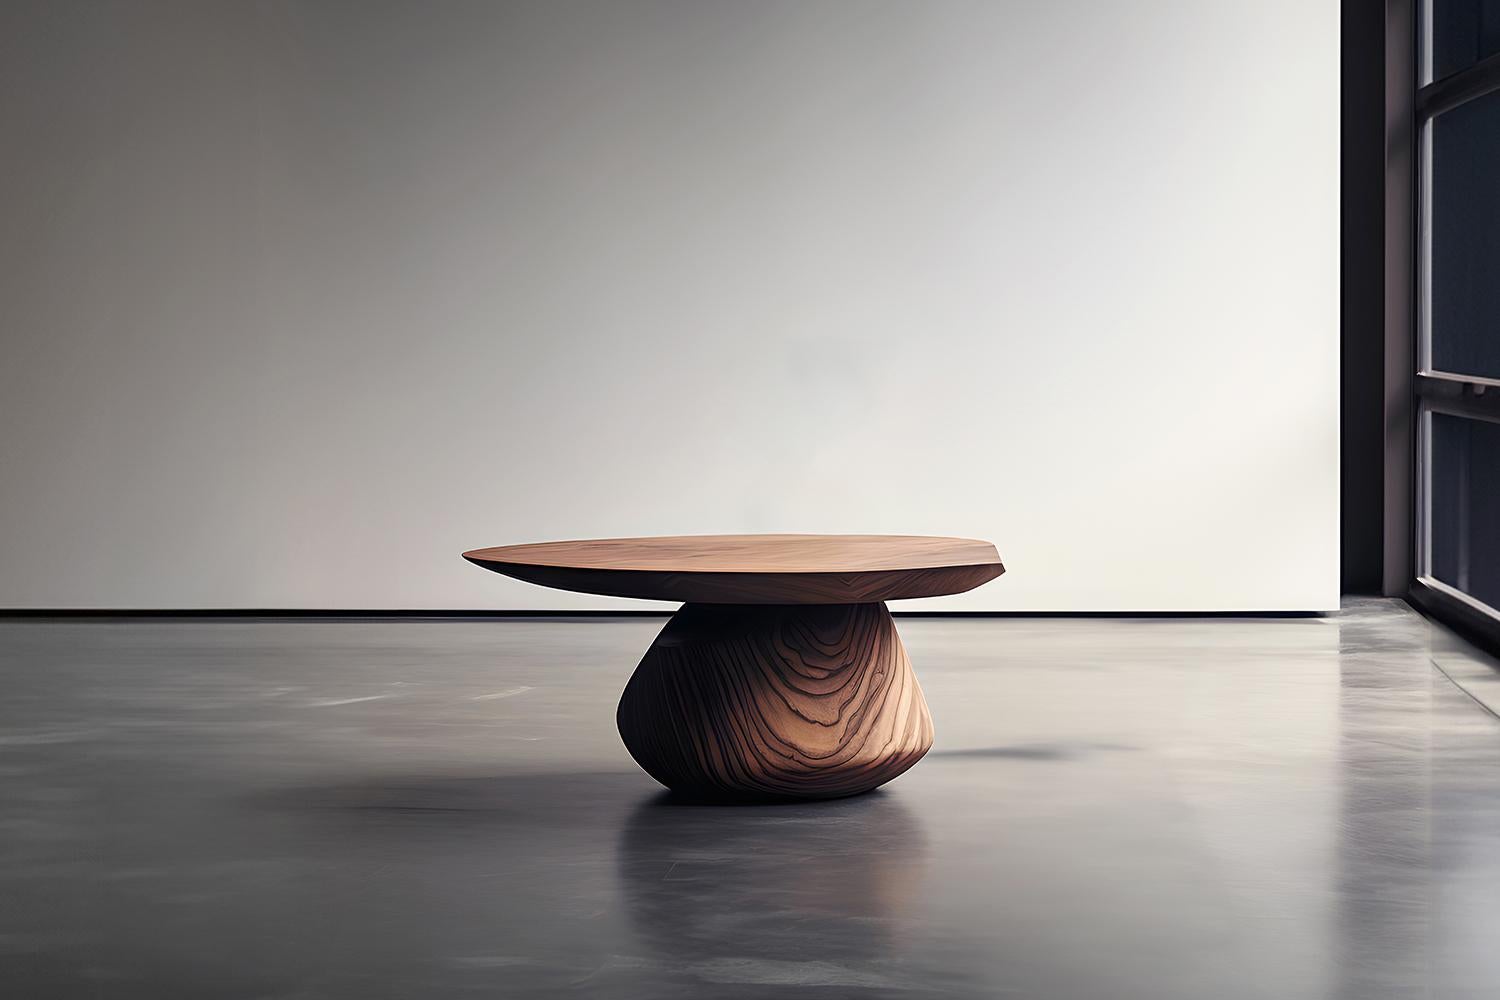 Sculptural Coffee Table Made of Solid Wood, Center Table Solace S33 by Joel Escalona


The Solace table series, designed by Joel Escalona, is a furniture collection that exudes balance and presence, thanks to its sensuous, dense, and irregular